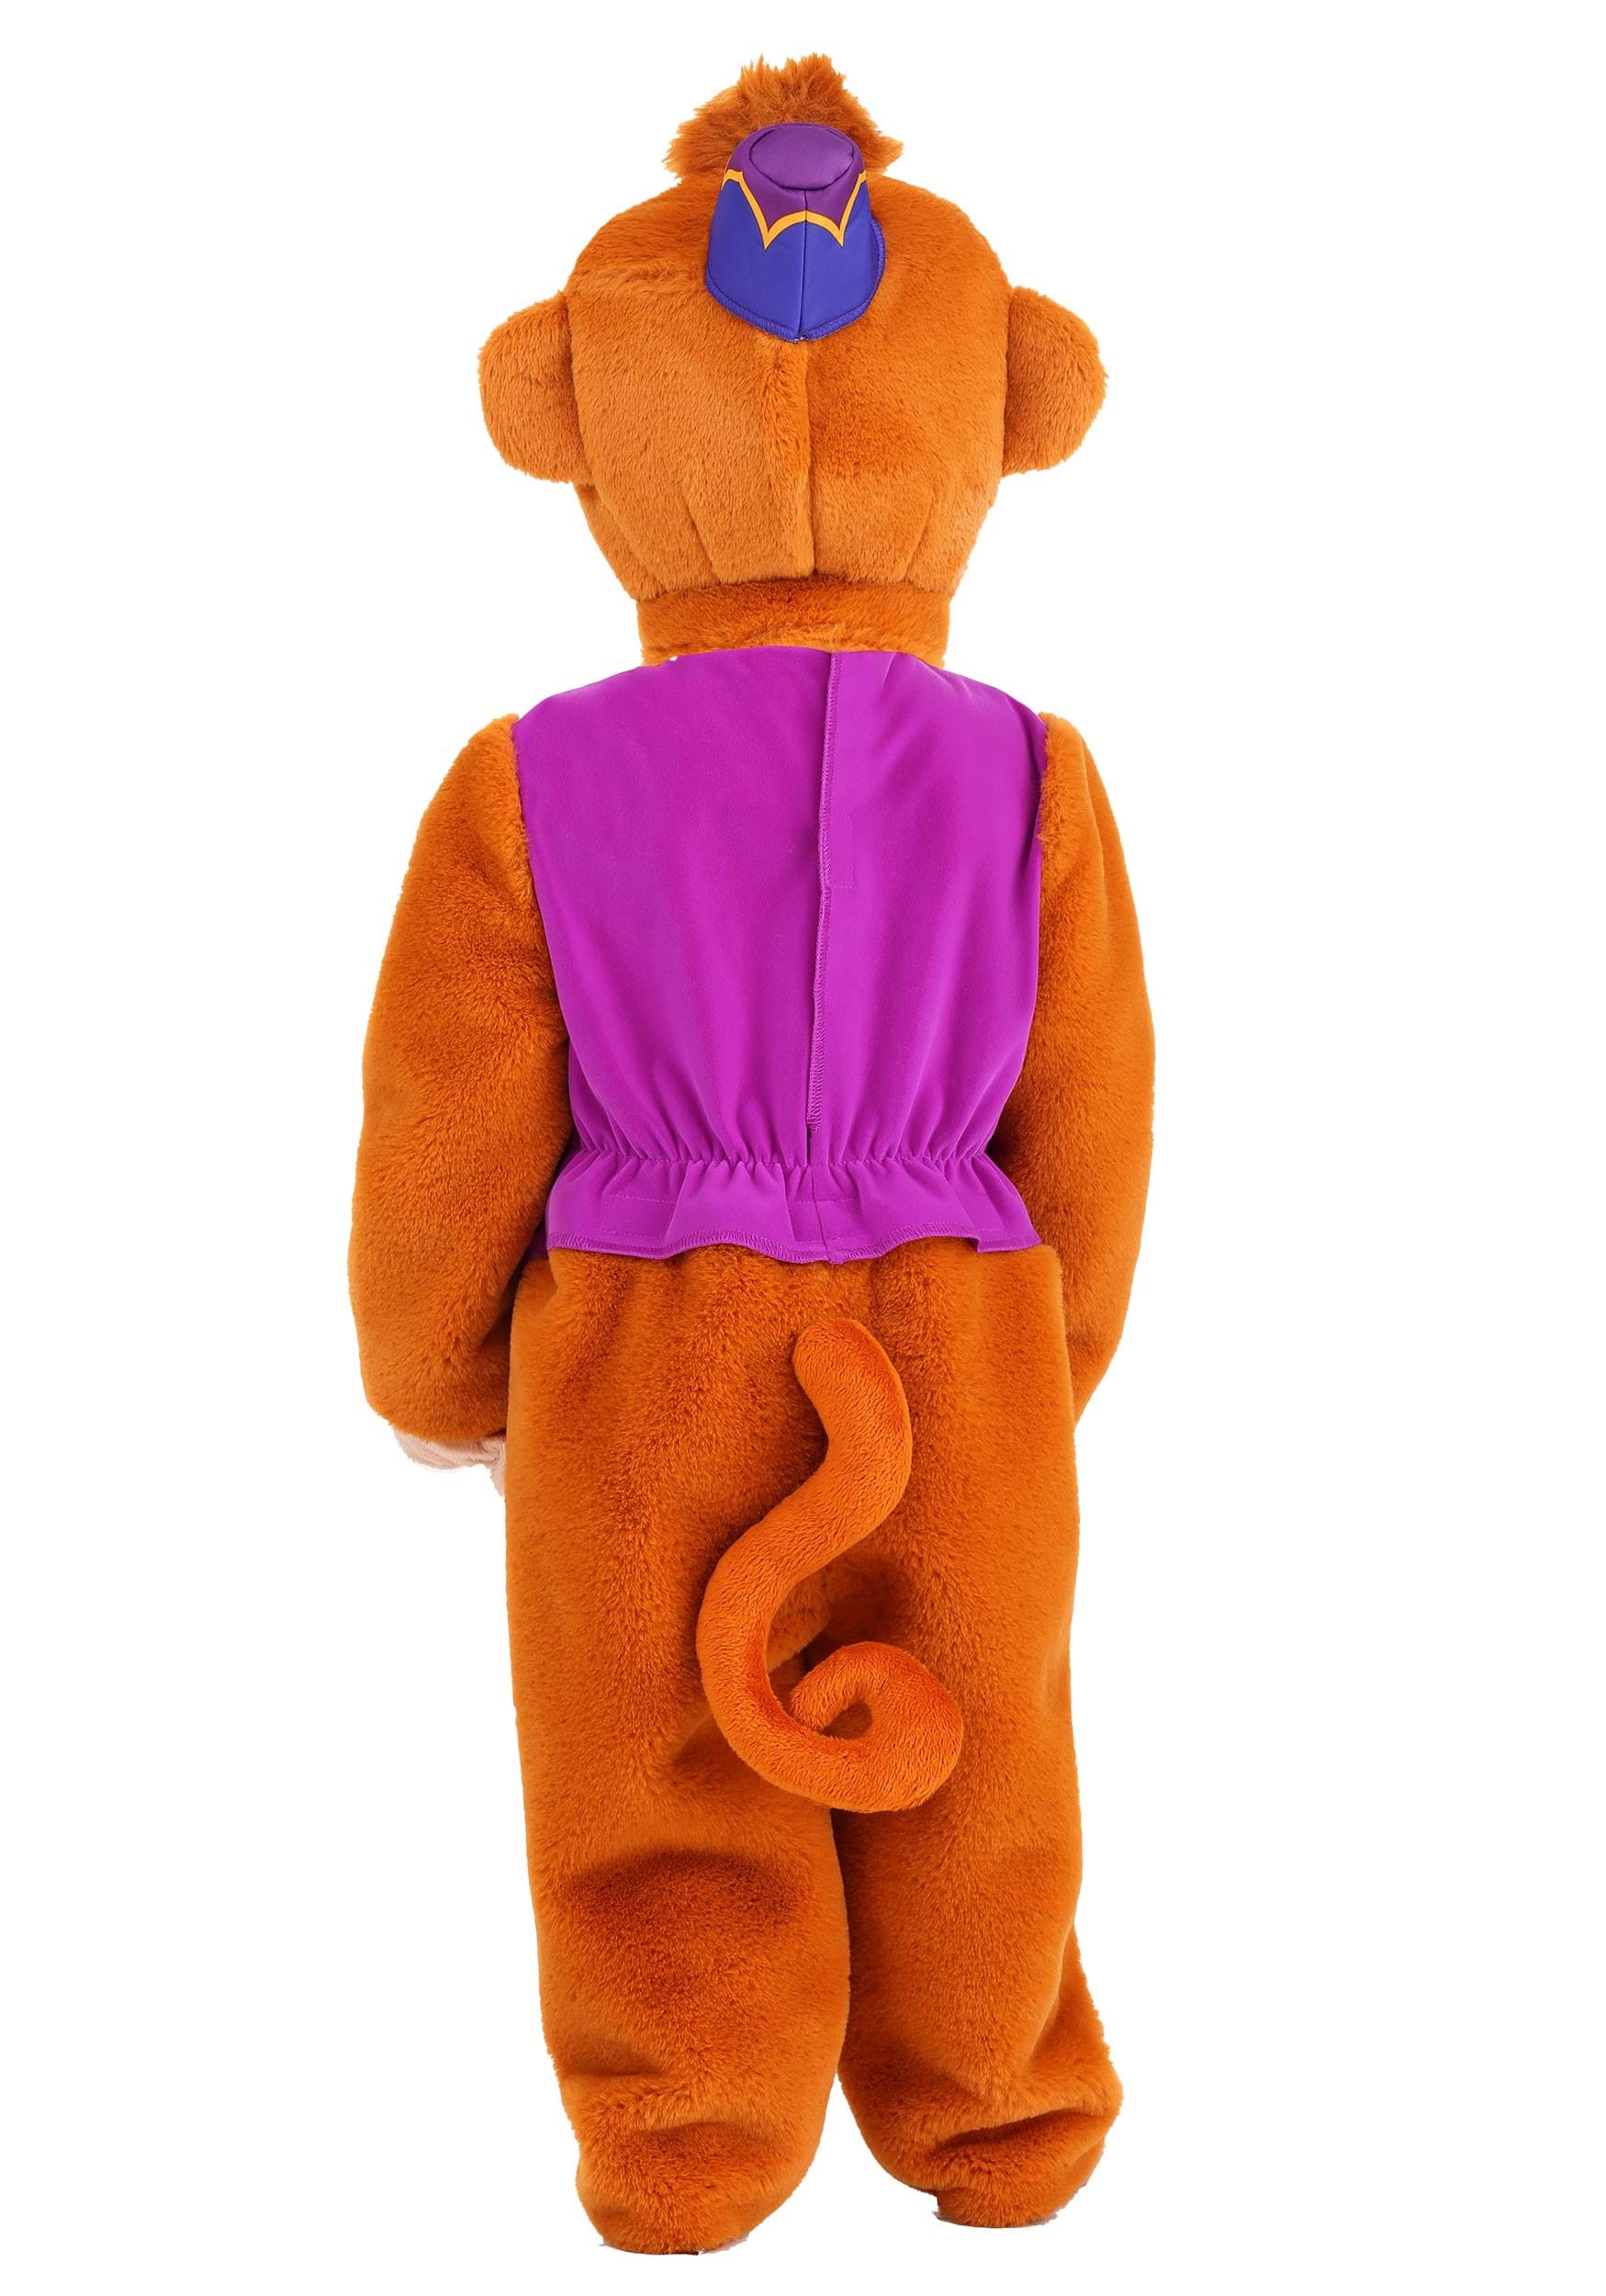 https://images.halloweencostumes.ca/products/62872/2-1-297759/aladdin-toddler-abu-deluxe-costume-alt-7.jpg